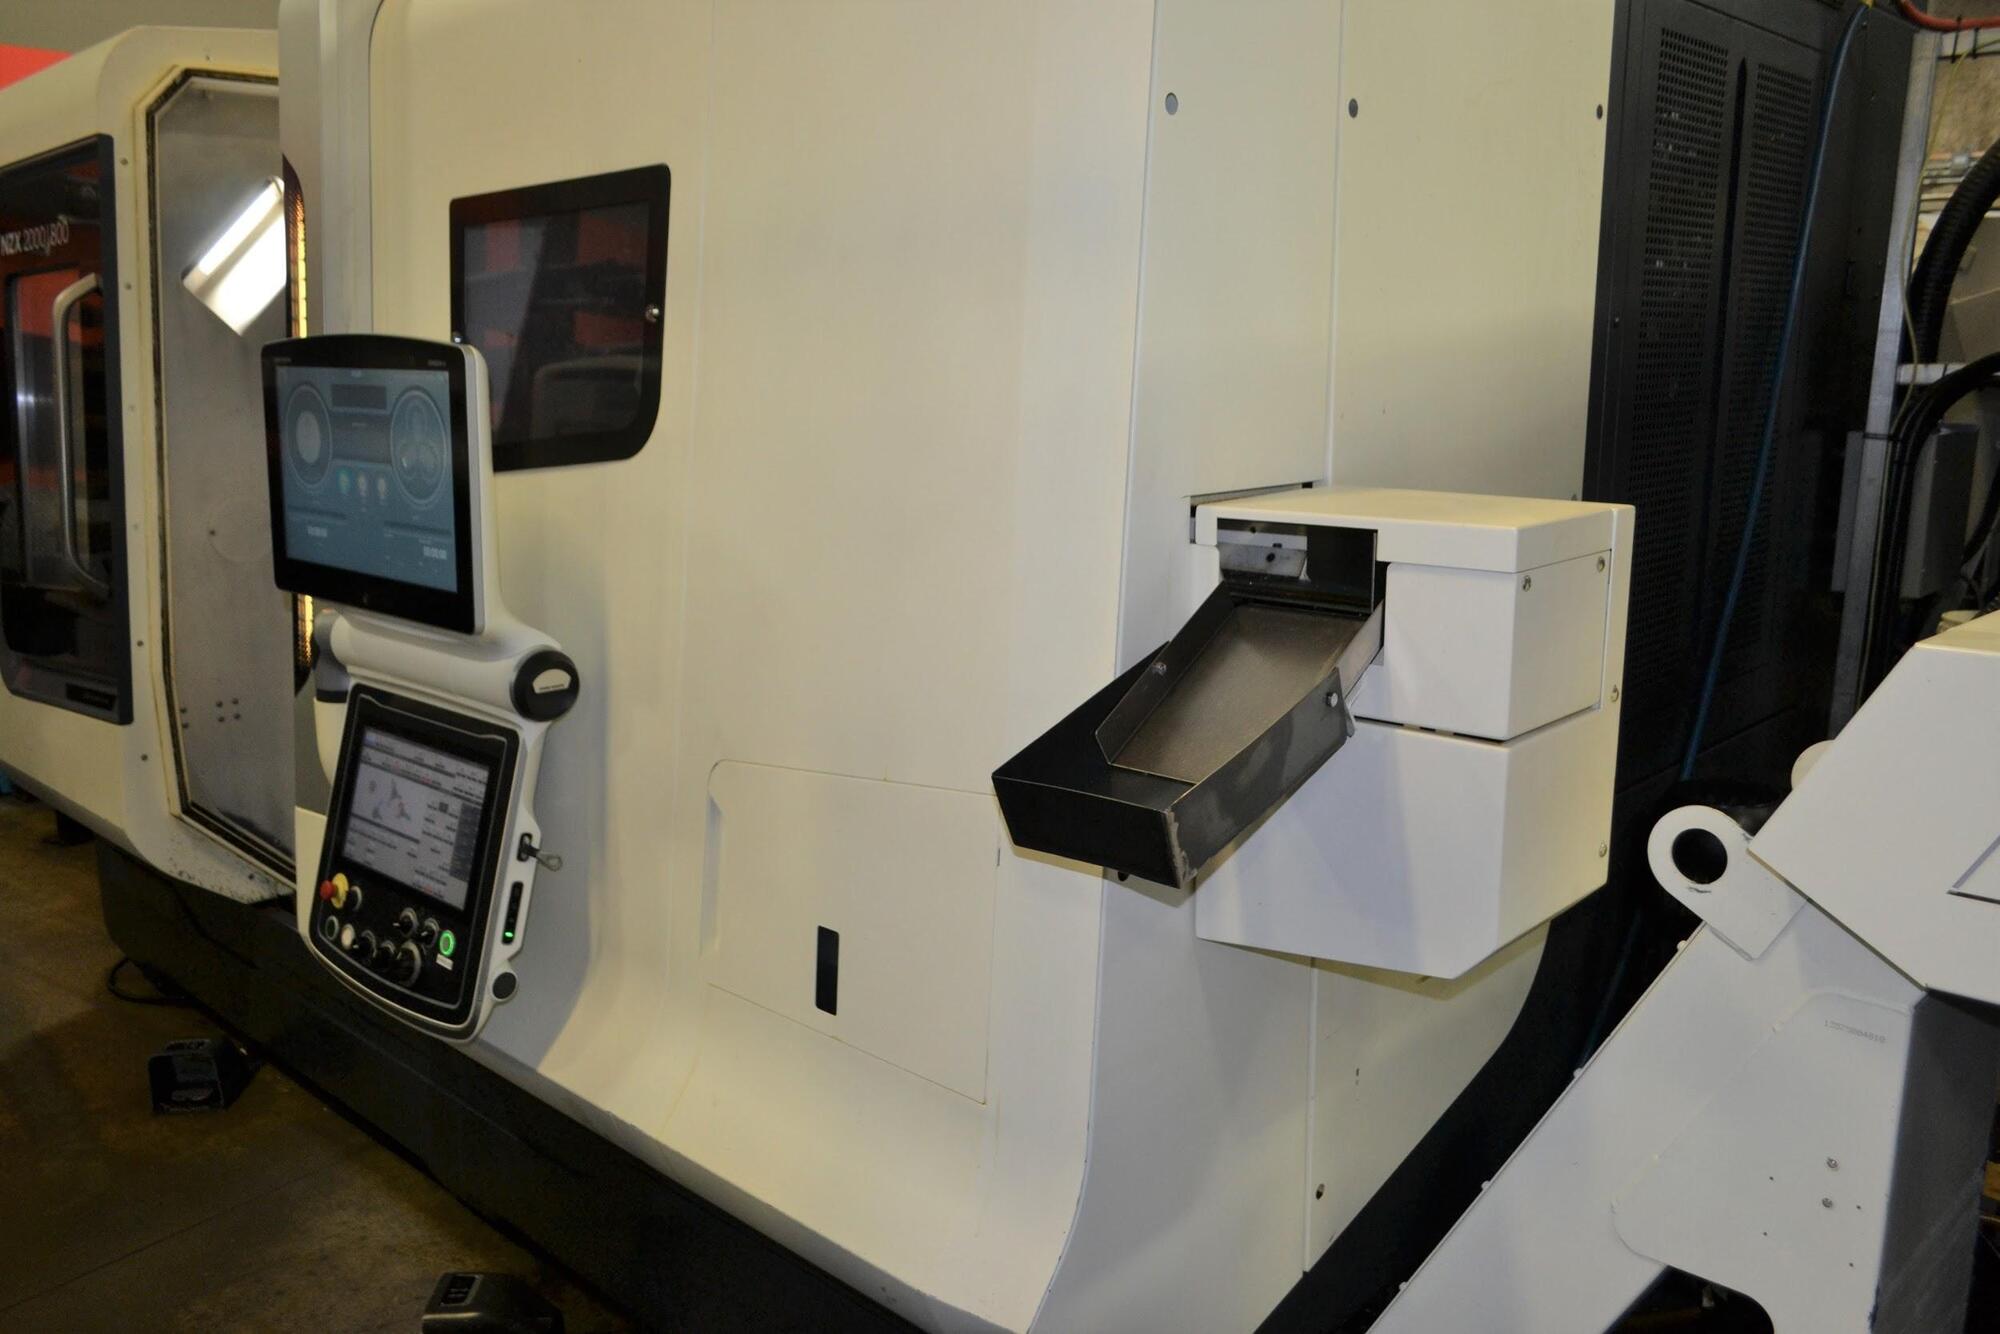 DMG MORI NZX 2000 5-Axis or More CNC Lathes | Midstate Machinery